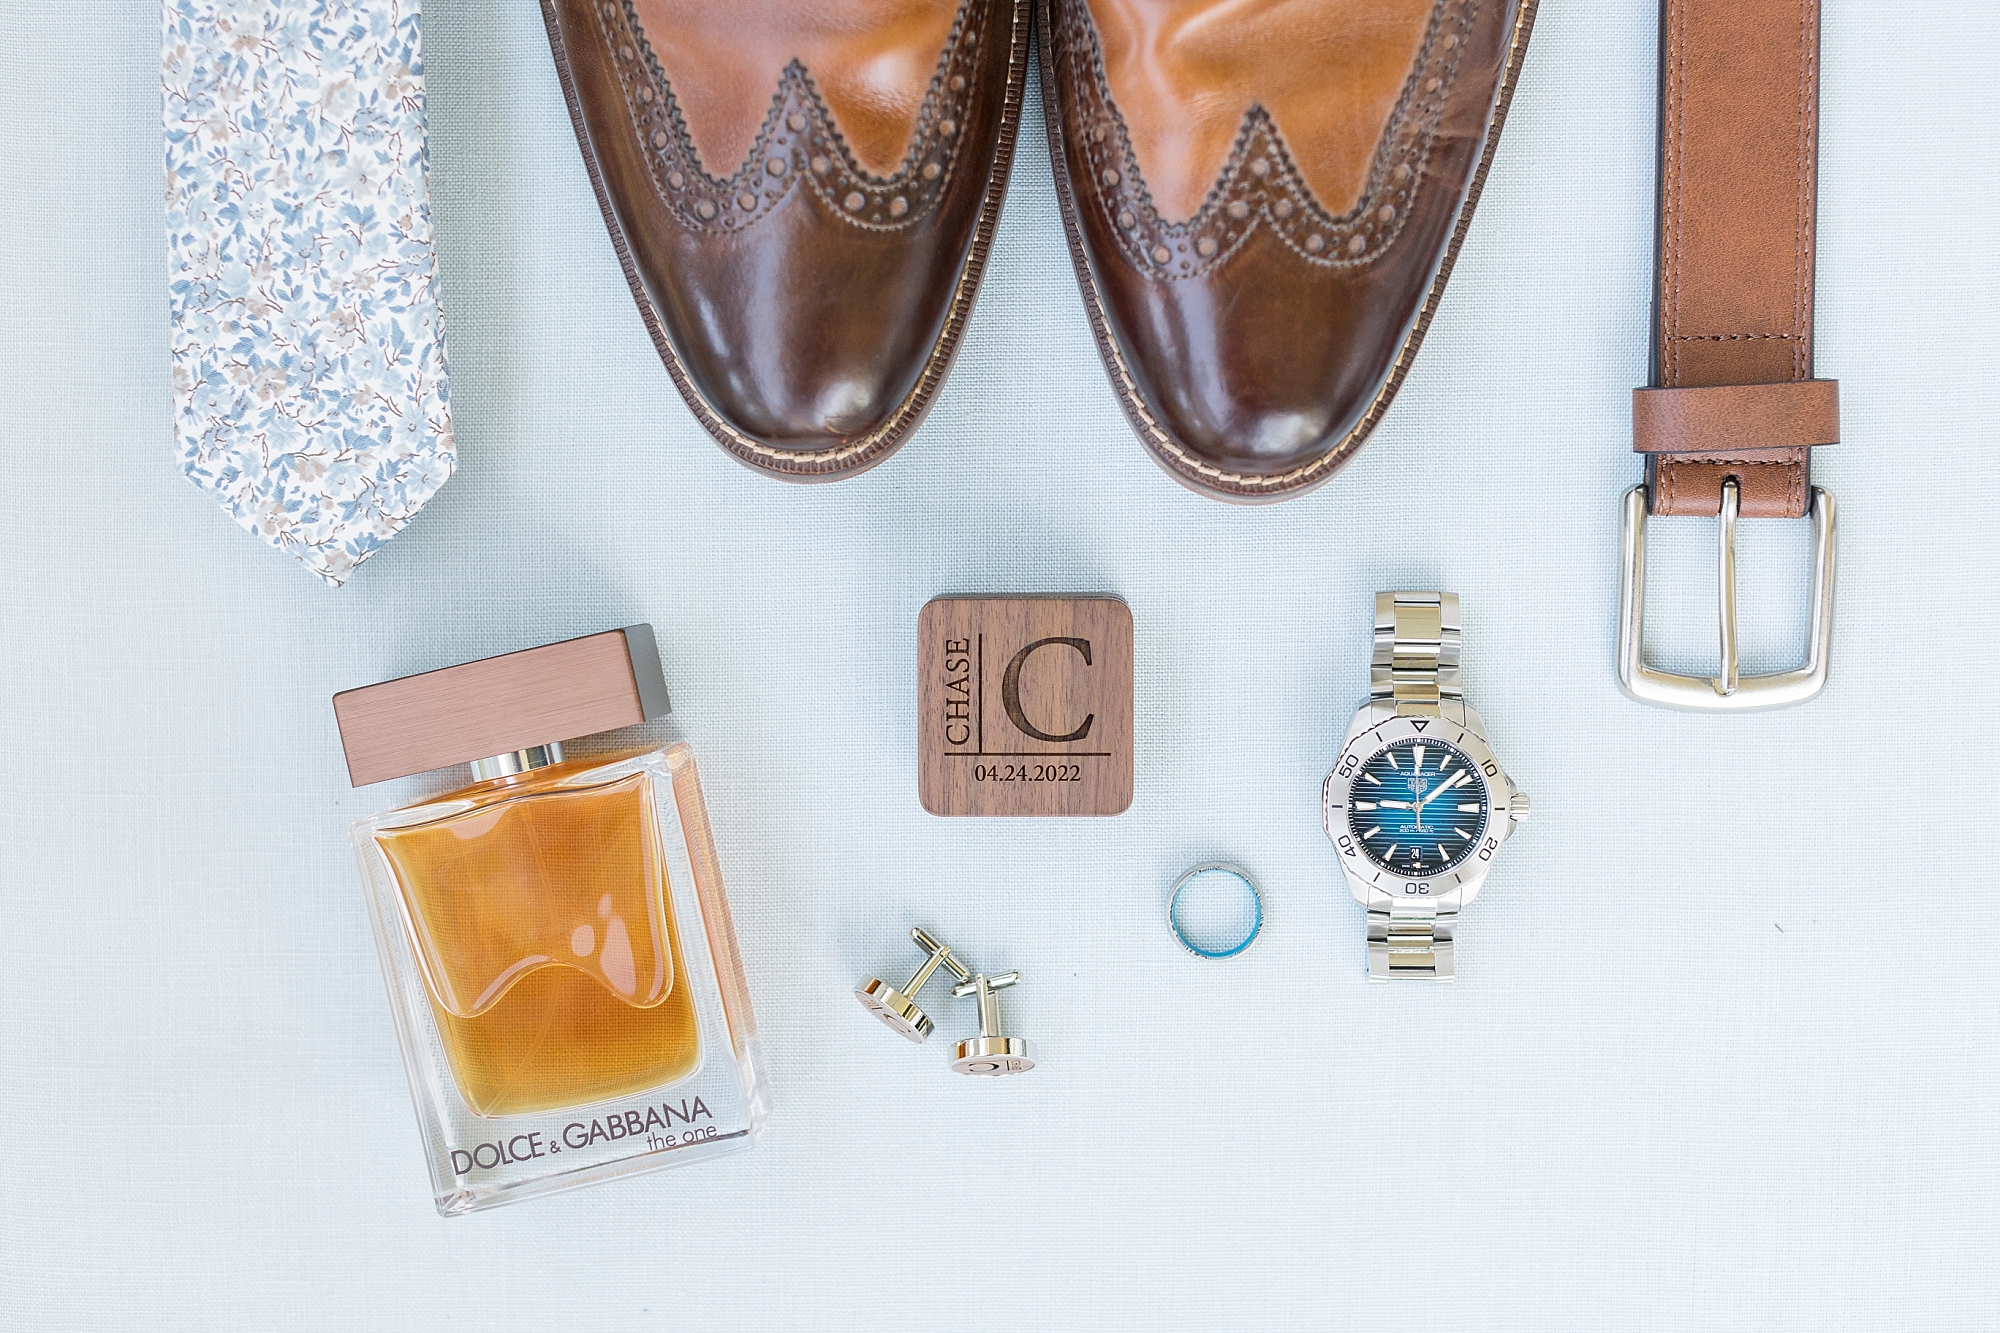 Raleigh Groom wedding outfit details  | Raleigh NC Wedding Photographer